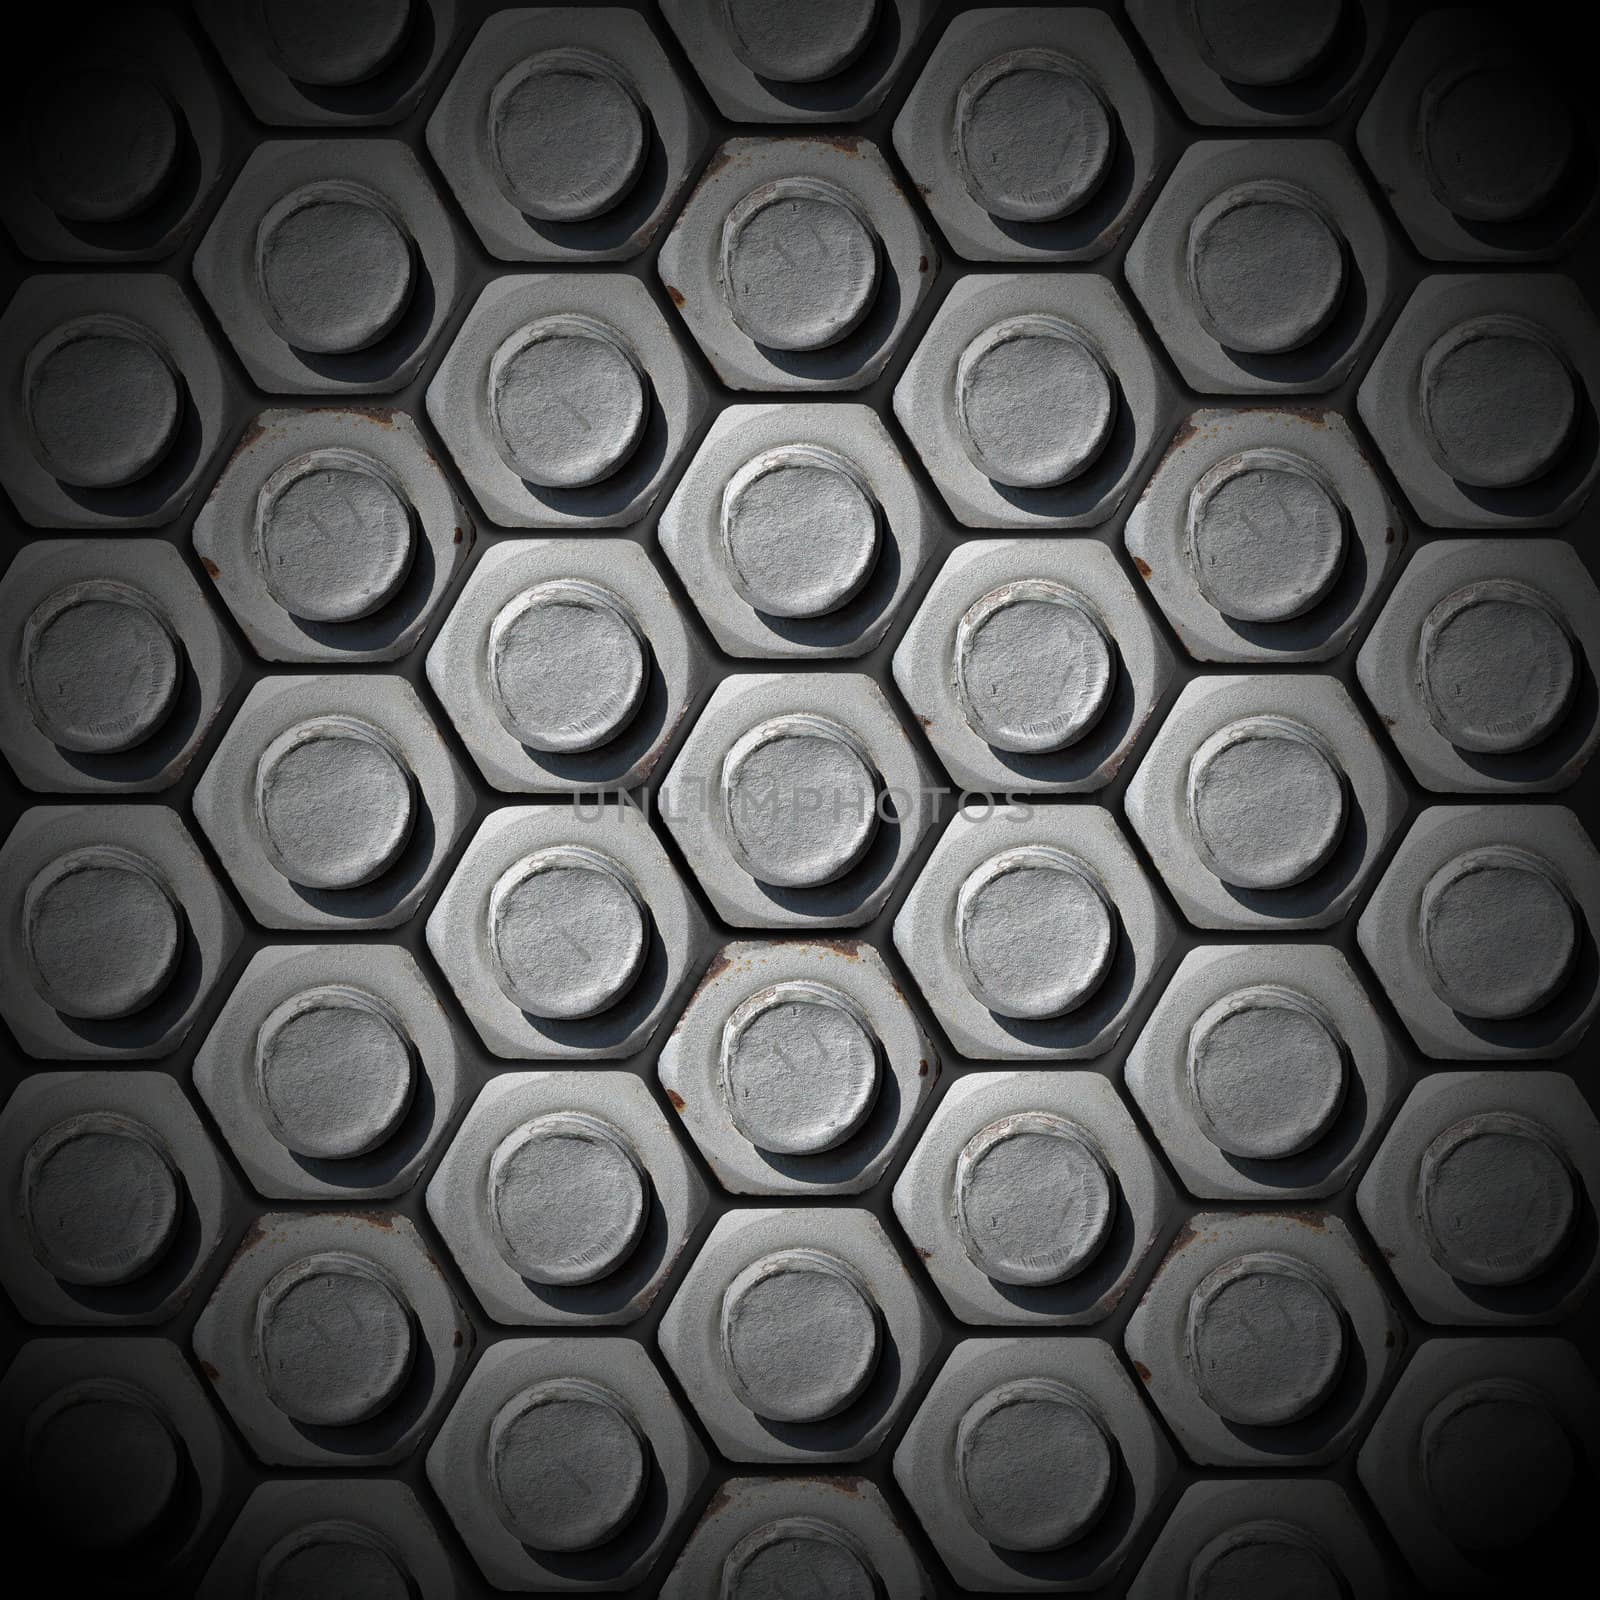 Metallic grunge background with bolts heads